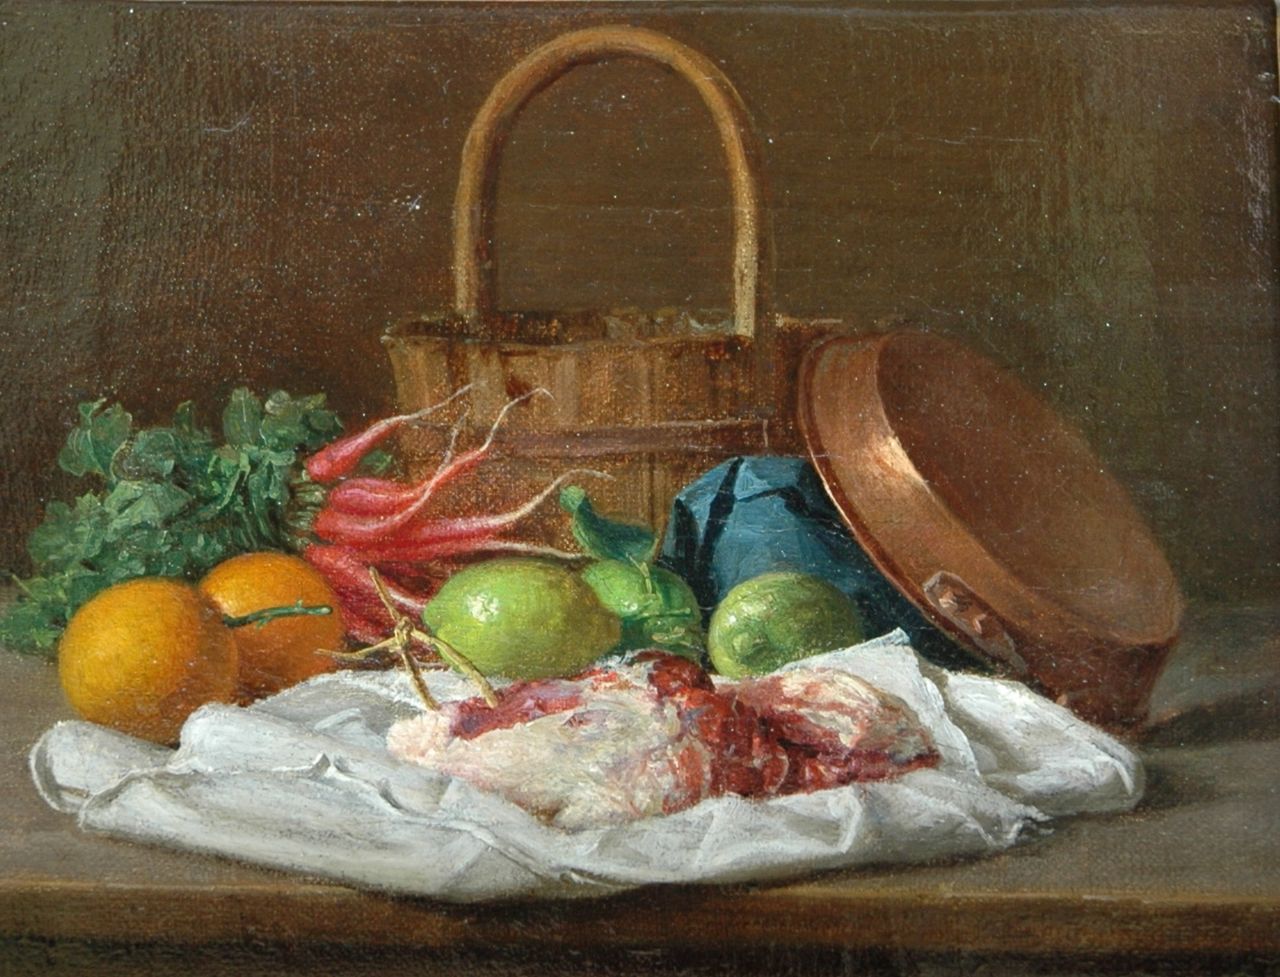 Duitse School, 19 eeuw   | Duitse School, 19 eeuw, A still life with radish and meat, Öl auf Leinwand 14,8 x 19,6 cm, signed l.l. with the initials 'D.N.'